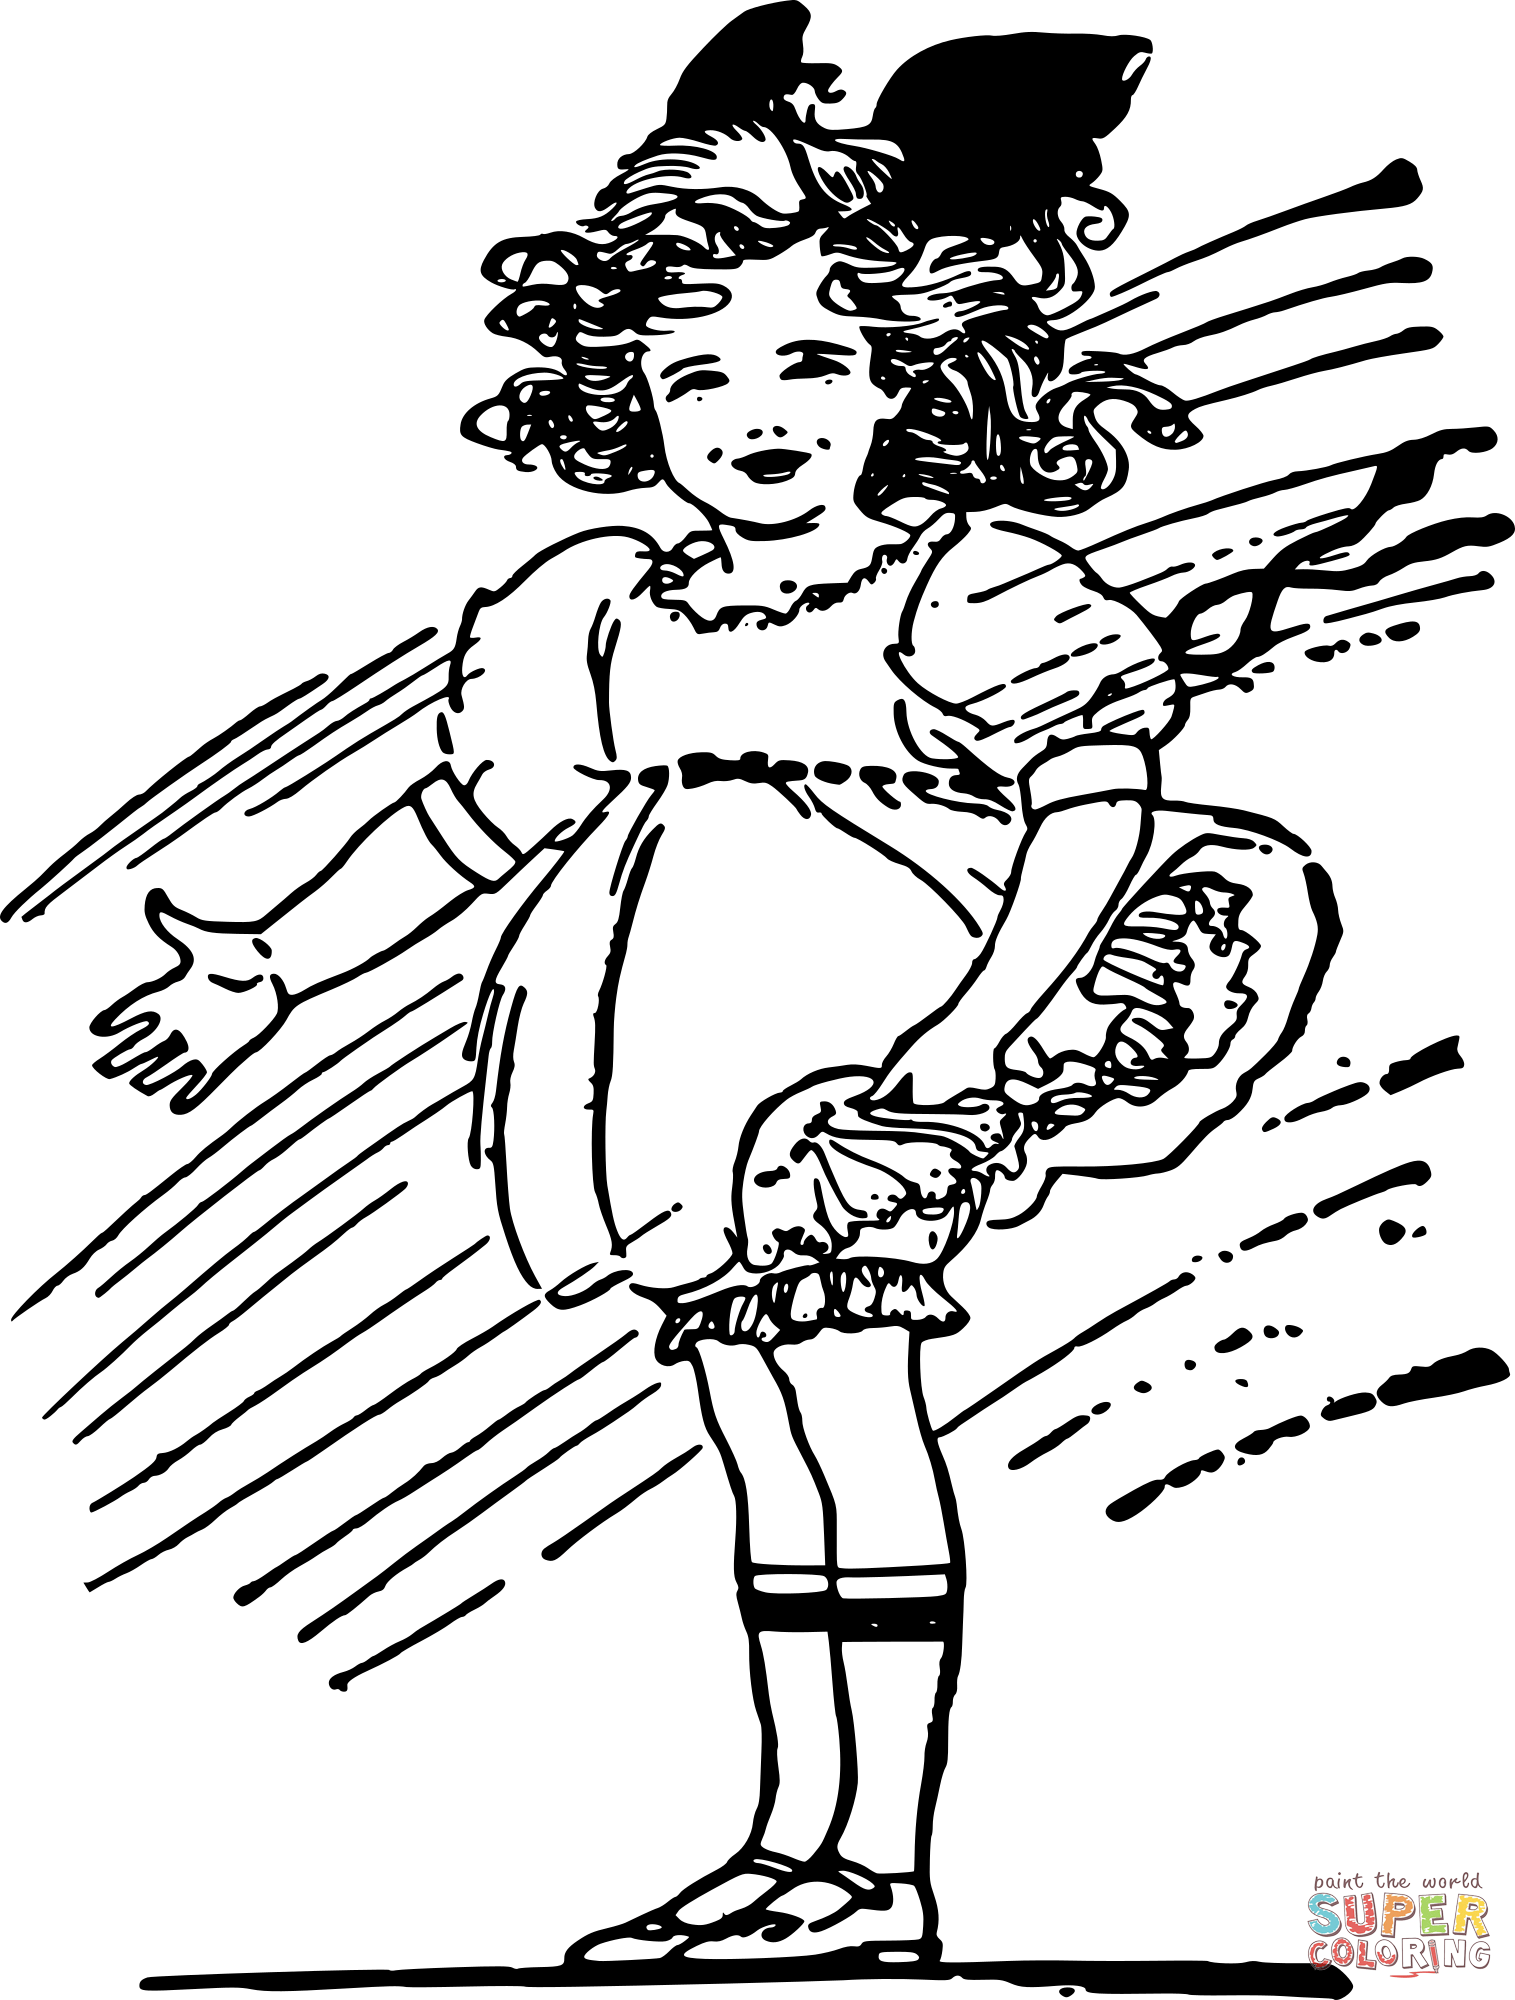 Vintage Windy Day coloring page | Free Printable Coloring Pages